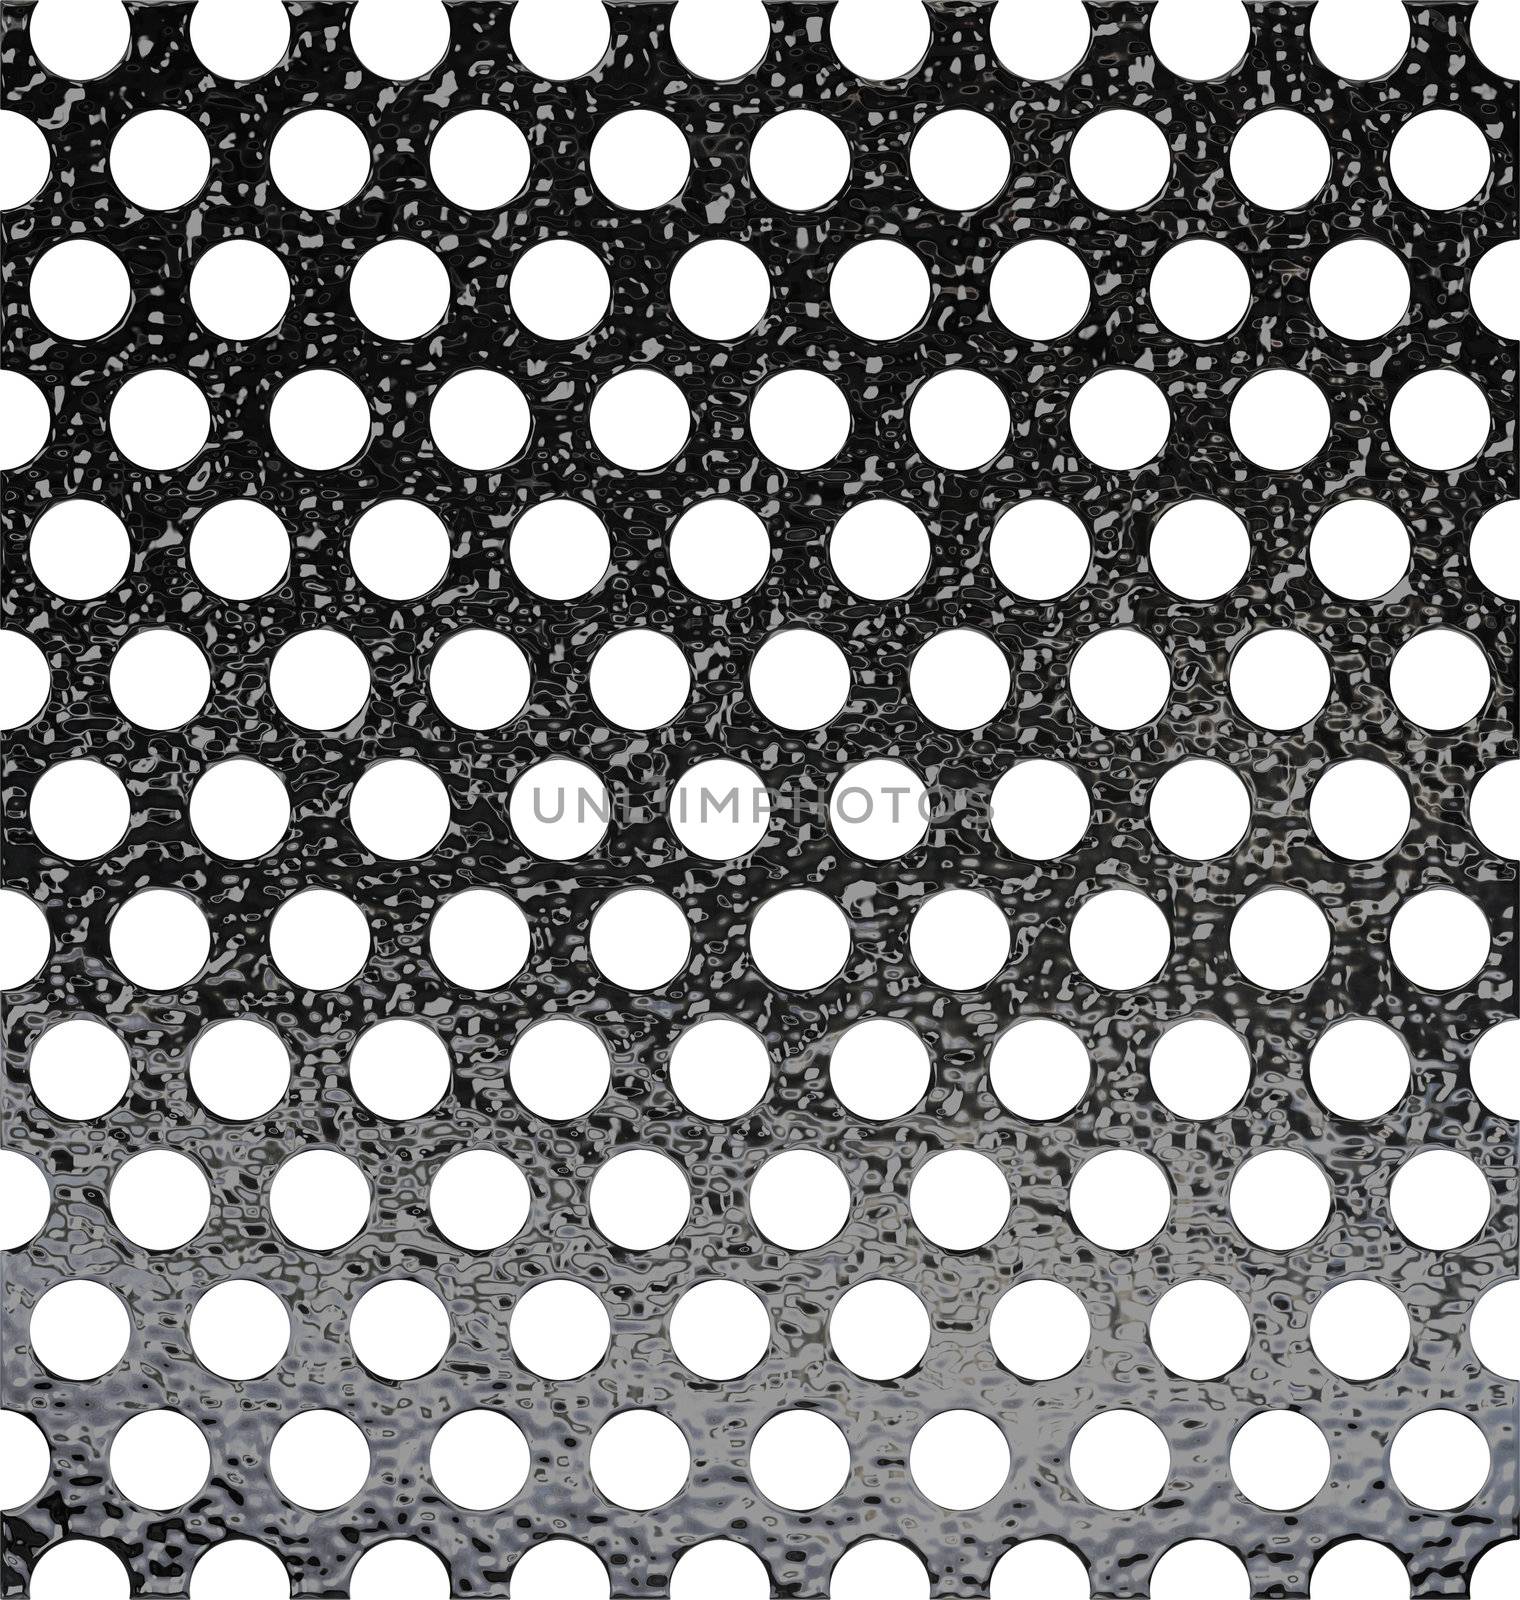 expanded steel plate nice seemless background good for theweb